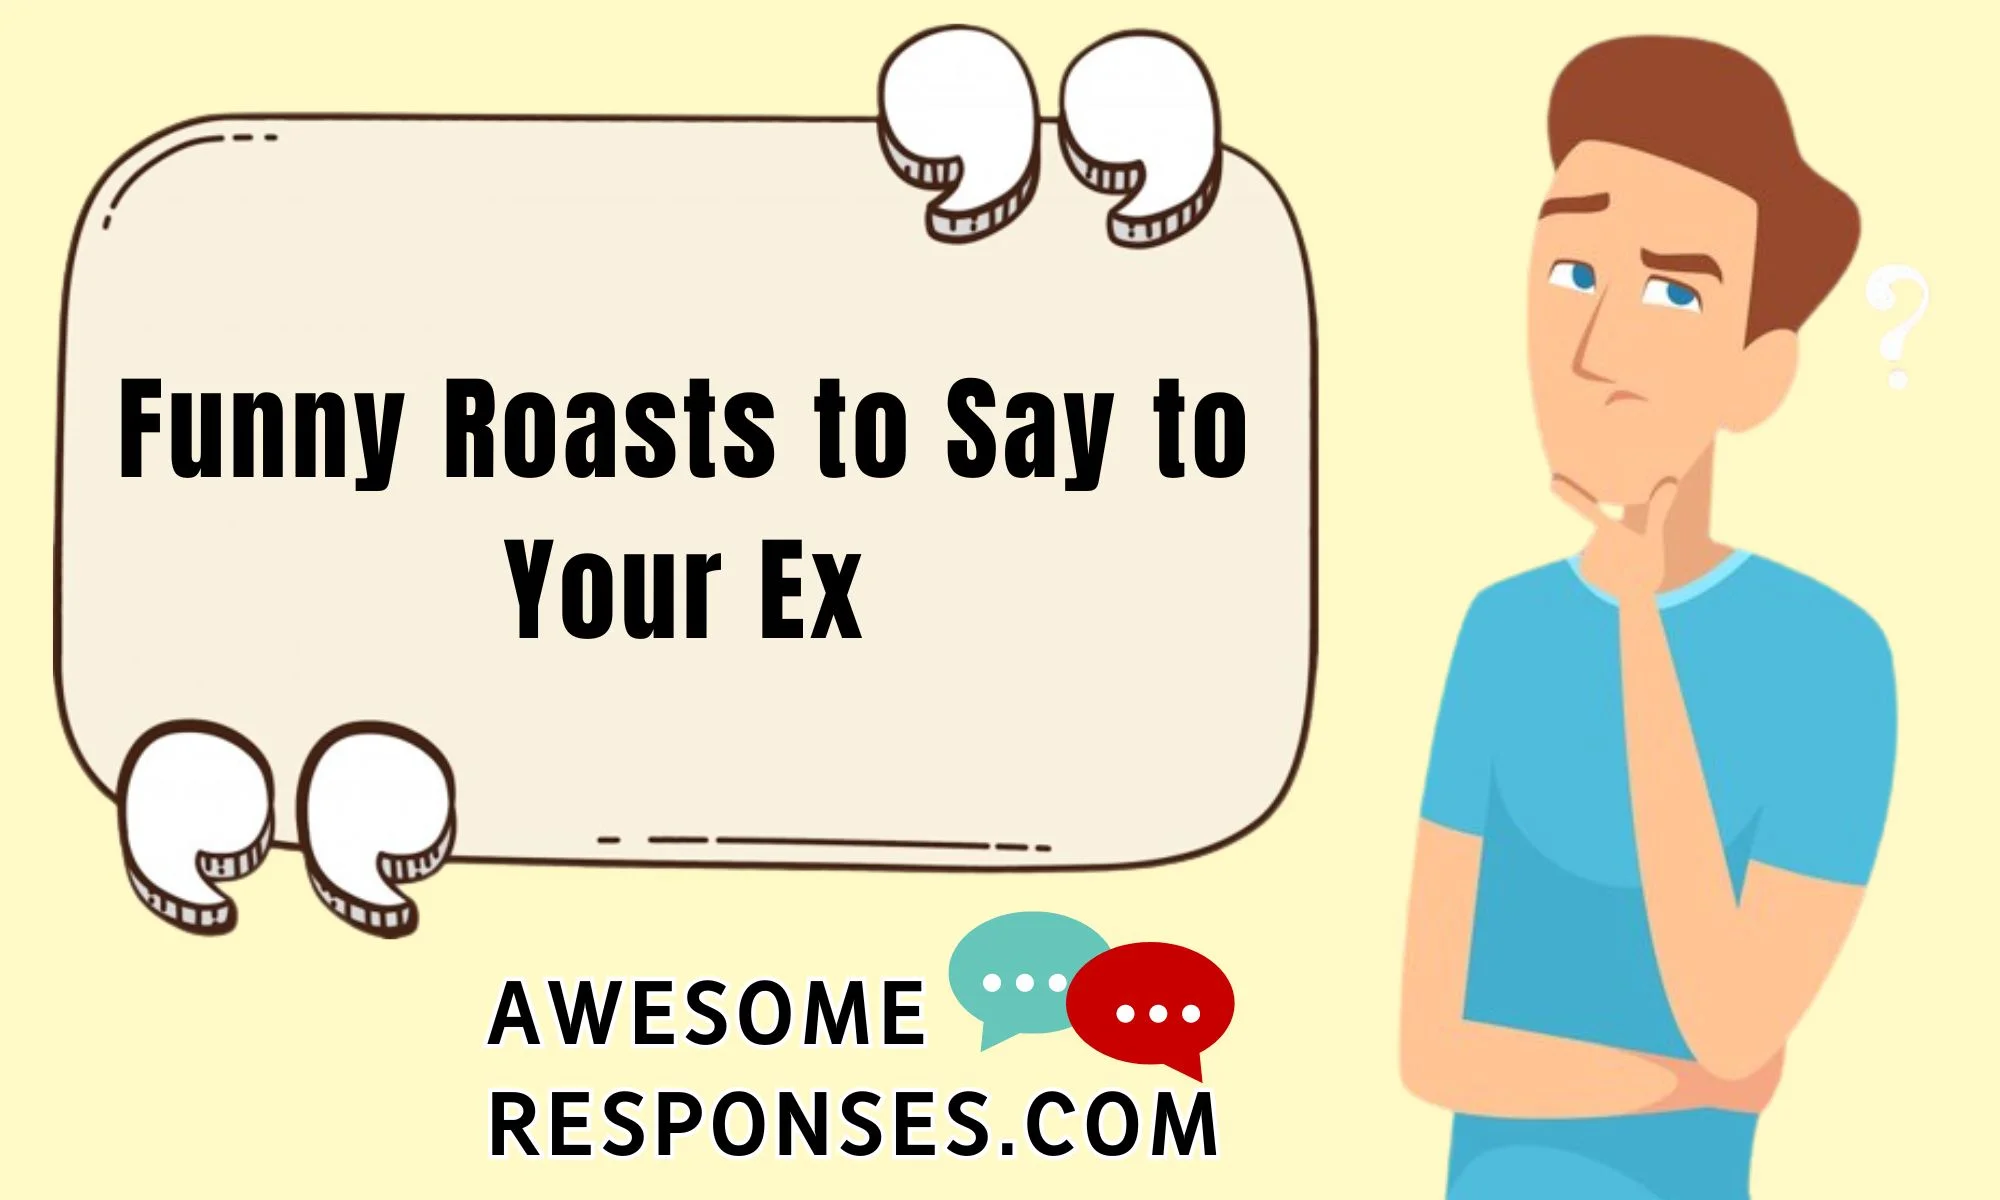 Funny Roasts to Say to Your Ex